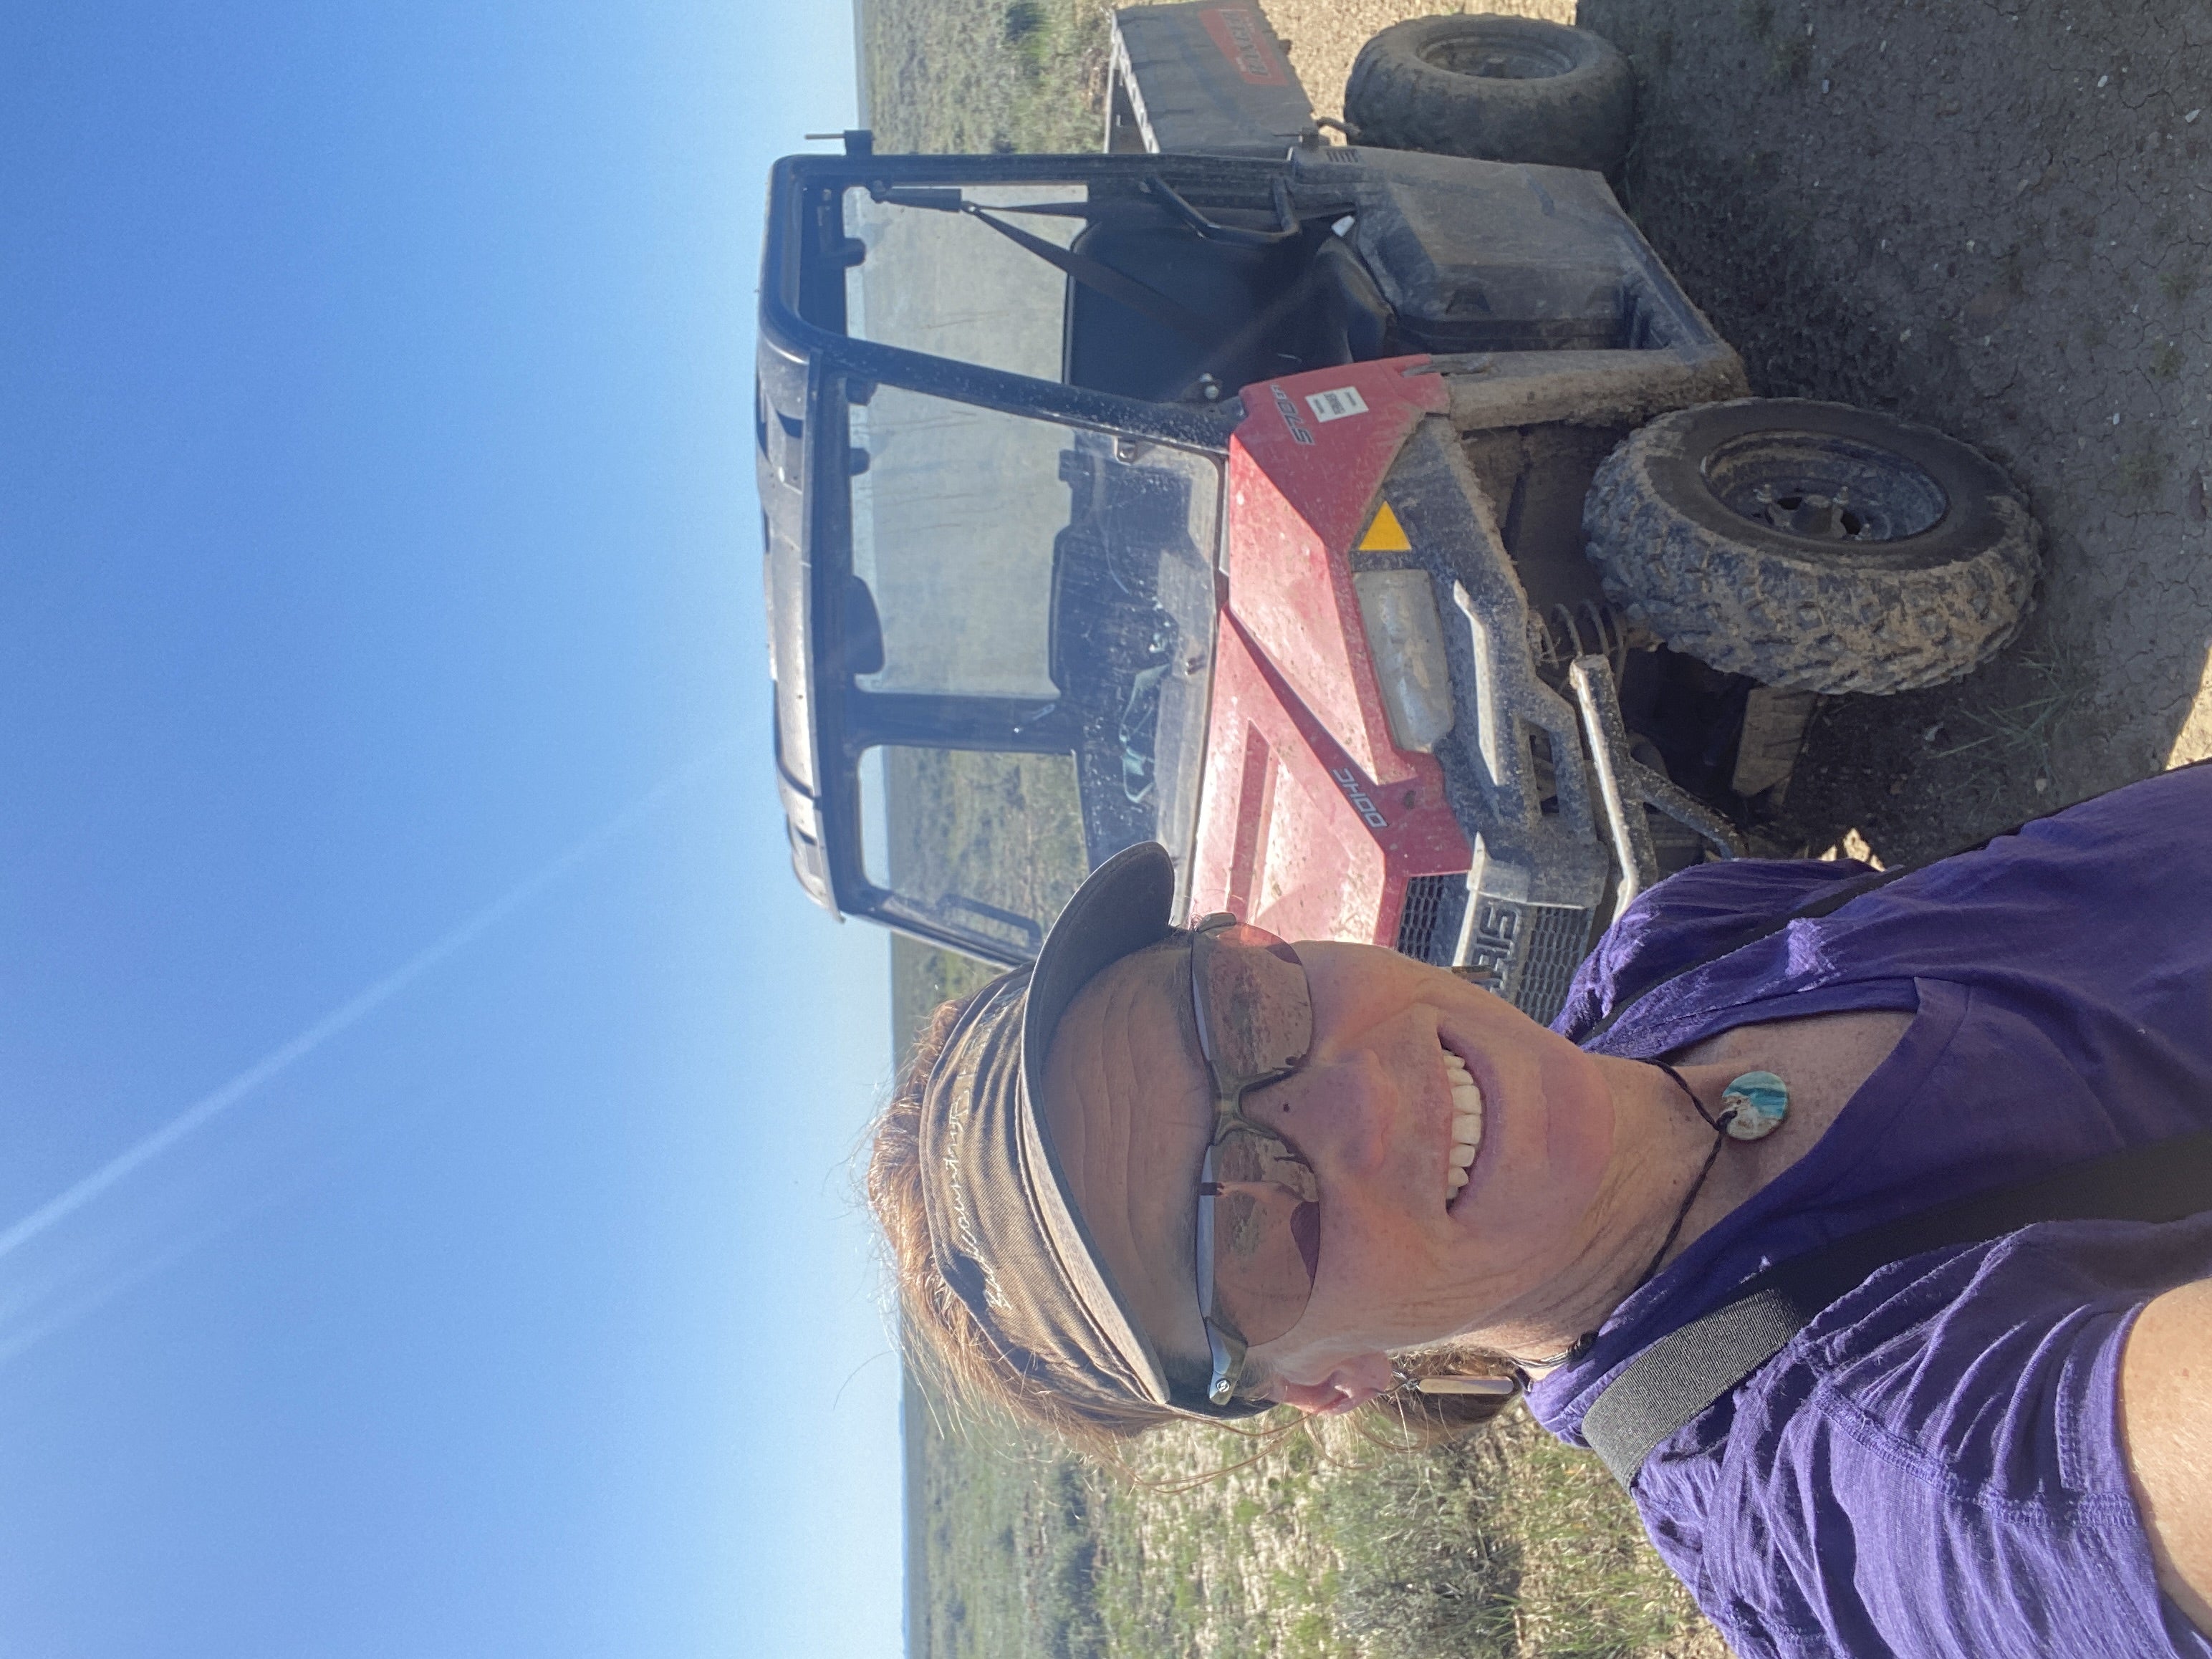 image show a biologist smiling for a selfie with a red UTV vehicle behind her